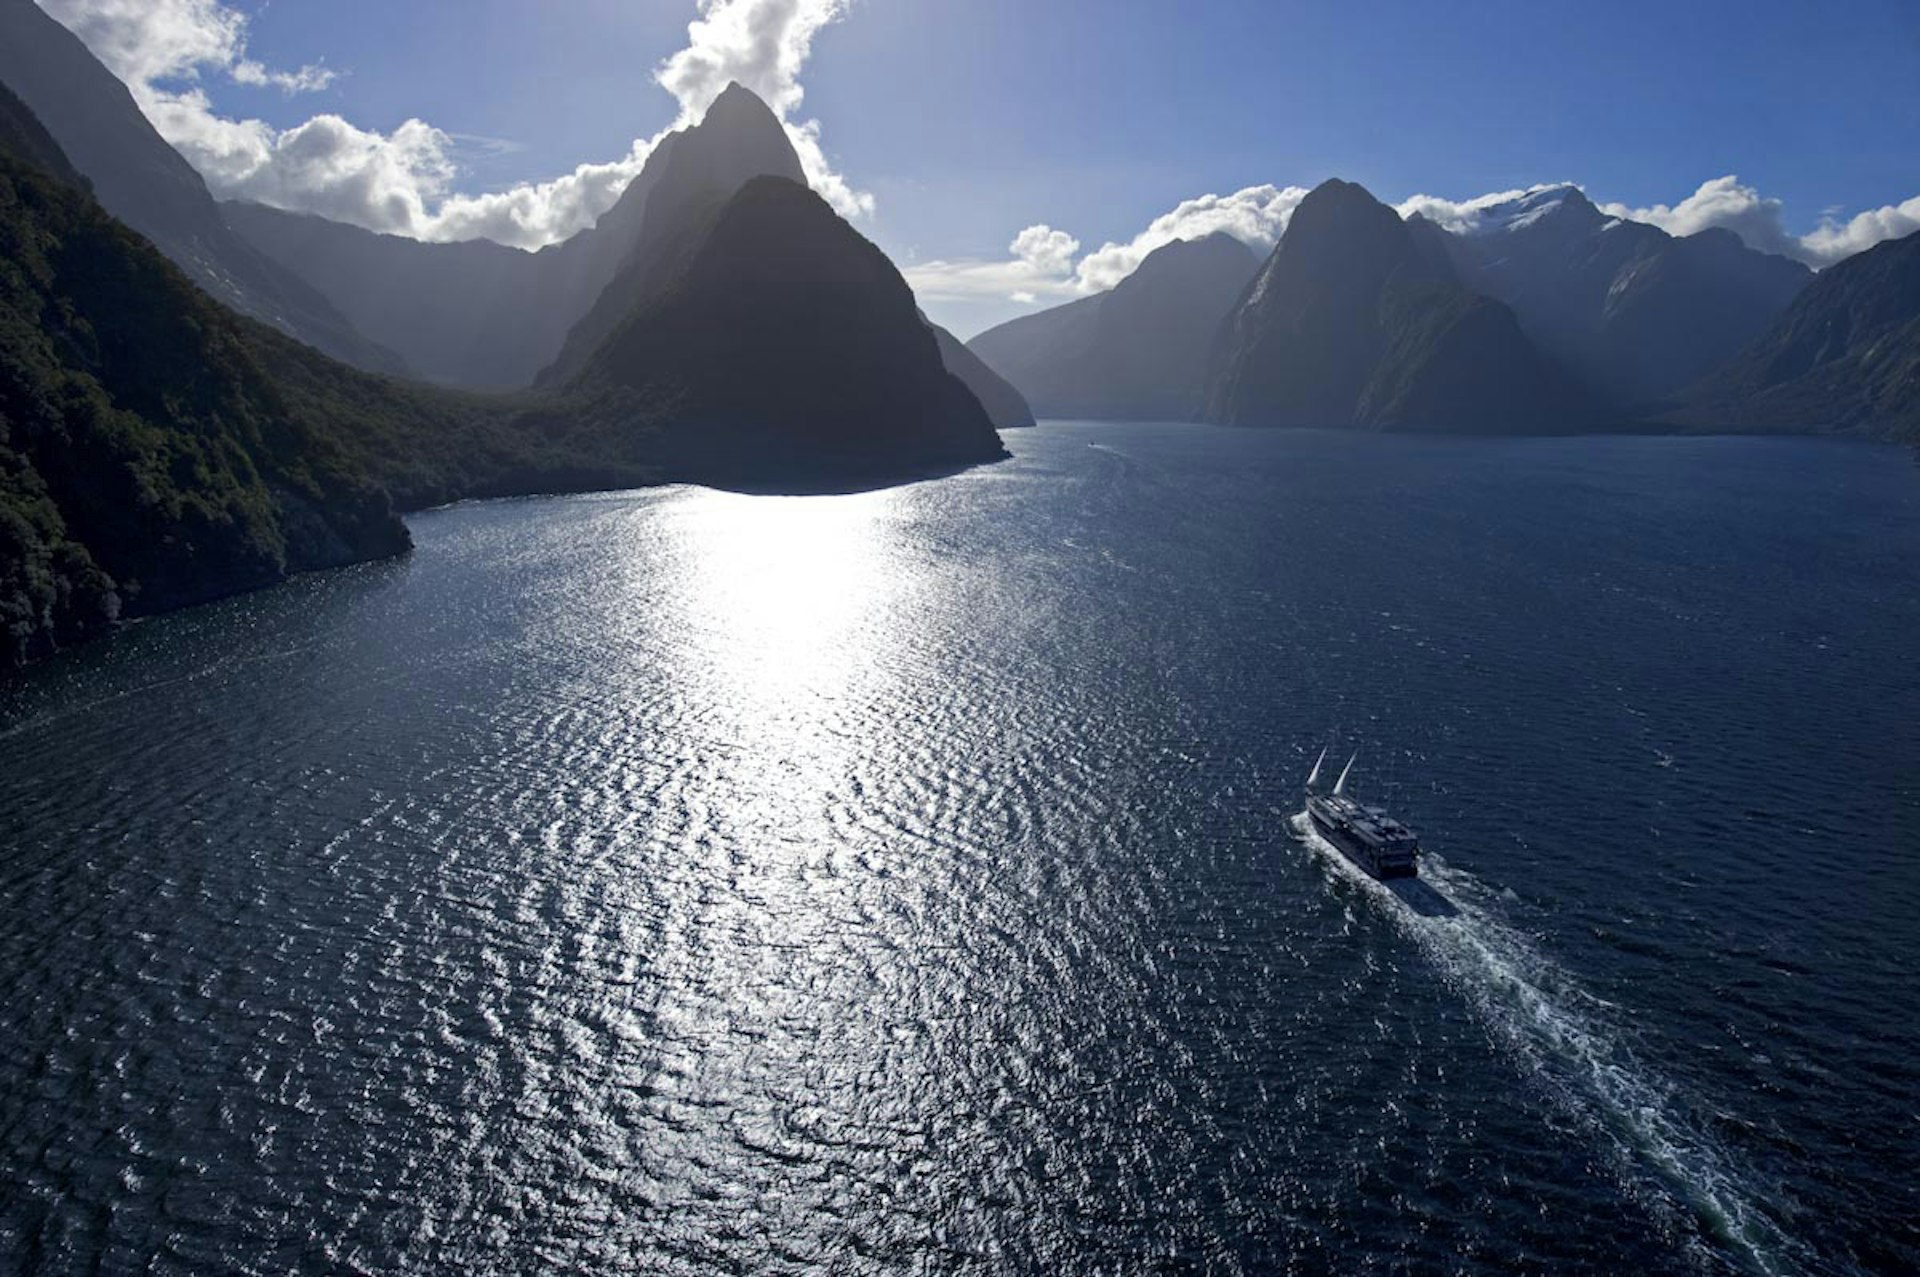 Overview of Milford Mariner cruising Milford Sound